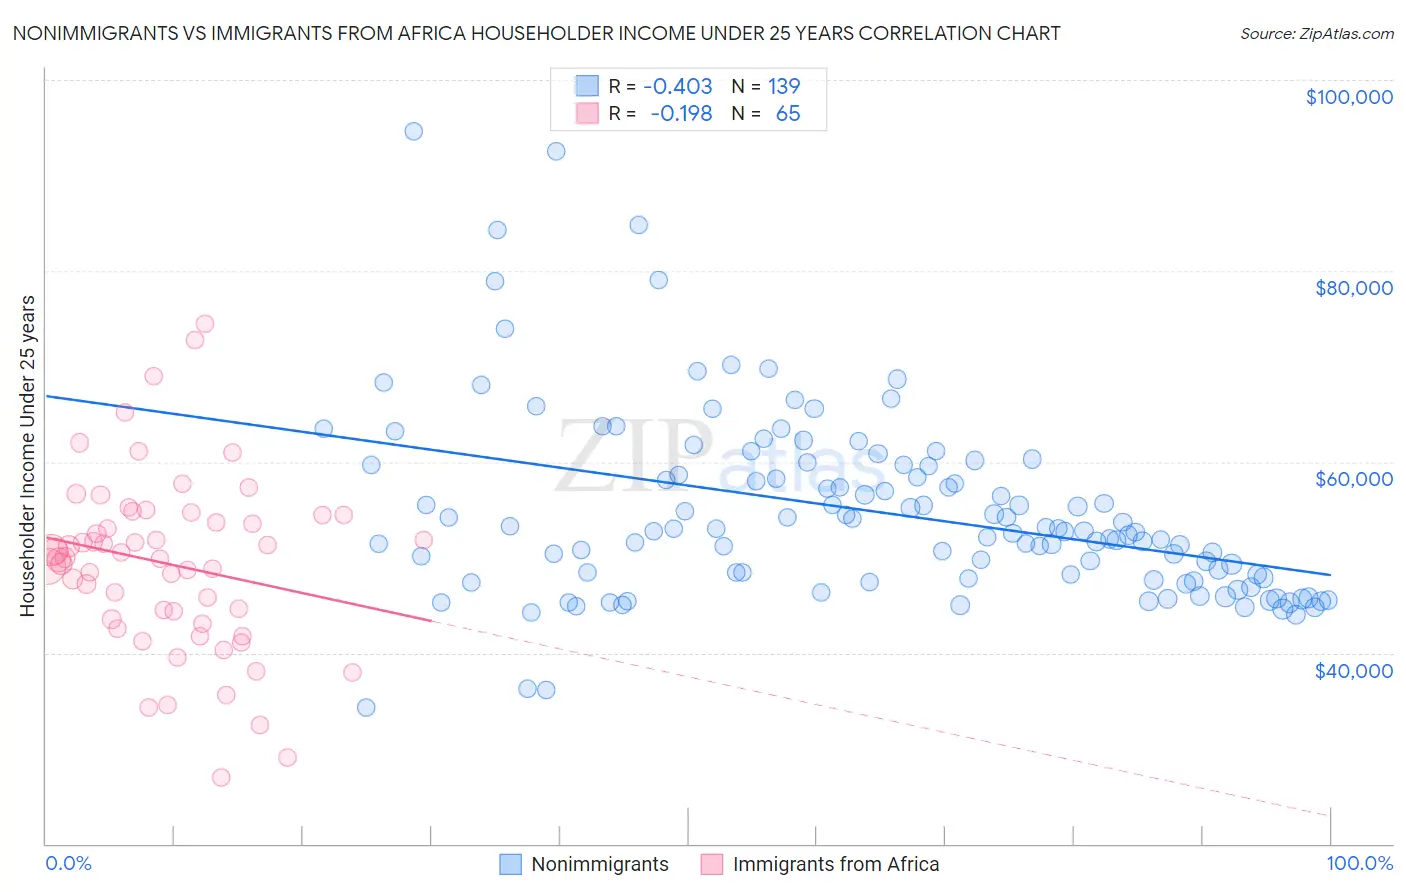 Nonimmigrants vs Immigrants from Africa Householder Income Under 25 years